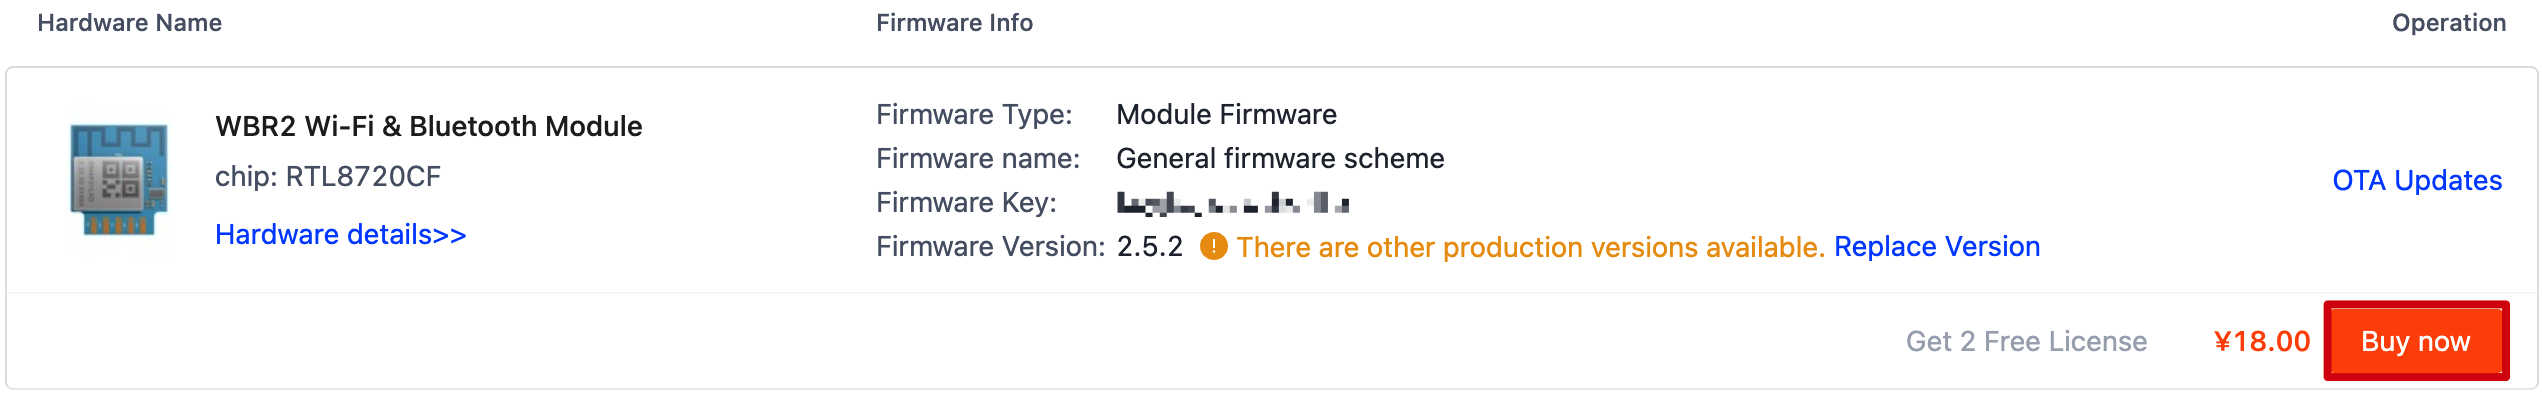 Select and Manage Firmware Versions